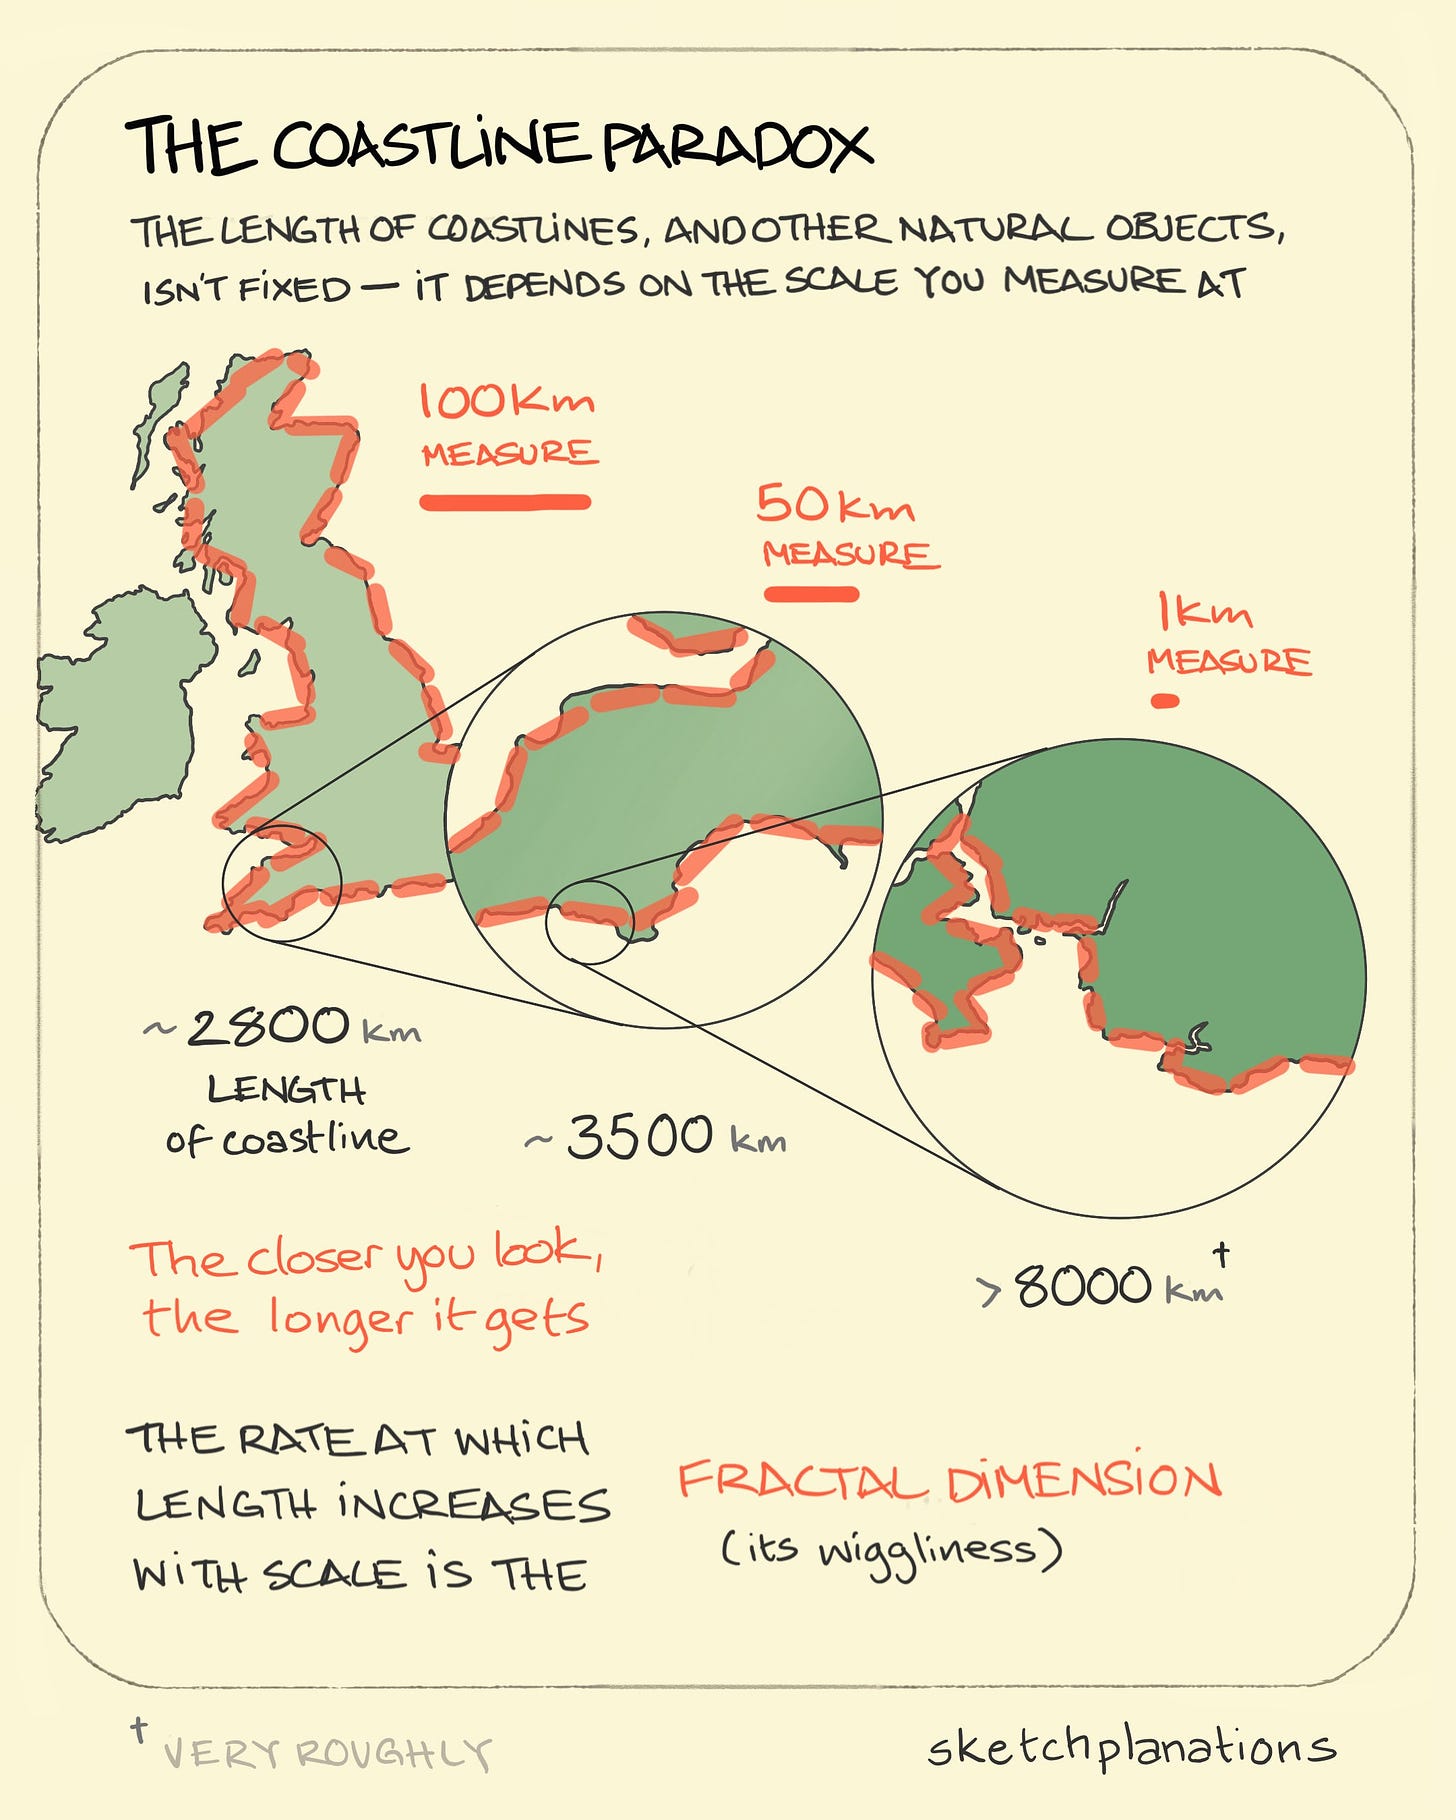 The coastline paradox: a map of the UK dividing up the coastline with ever smaller rulers shows how the coastline length dramatically increases